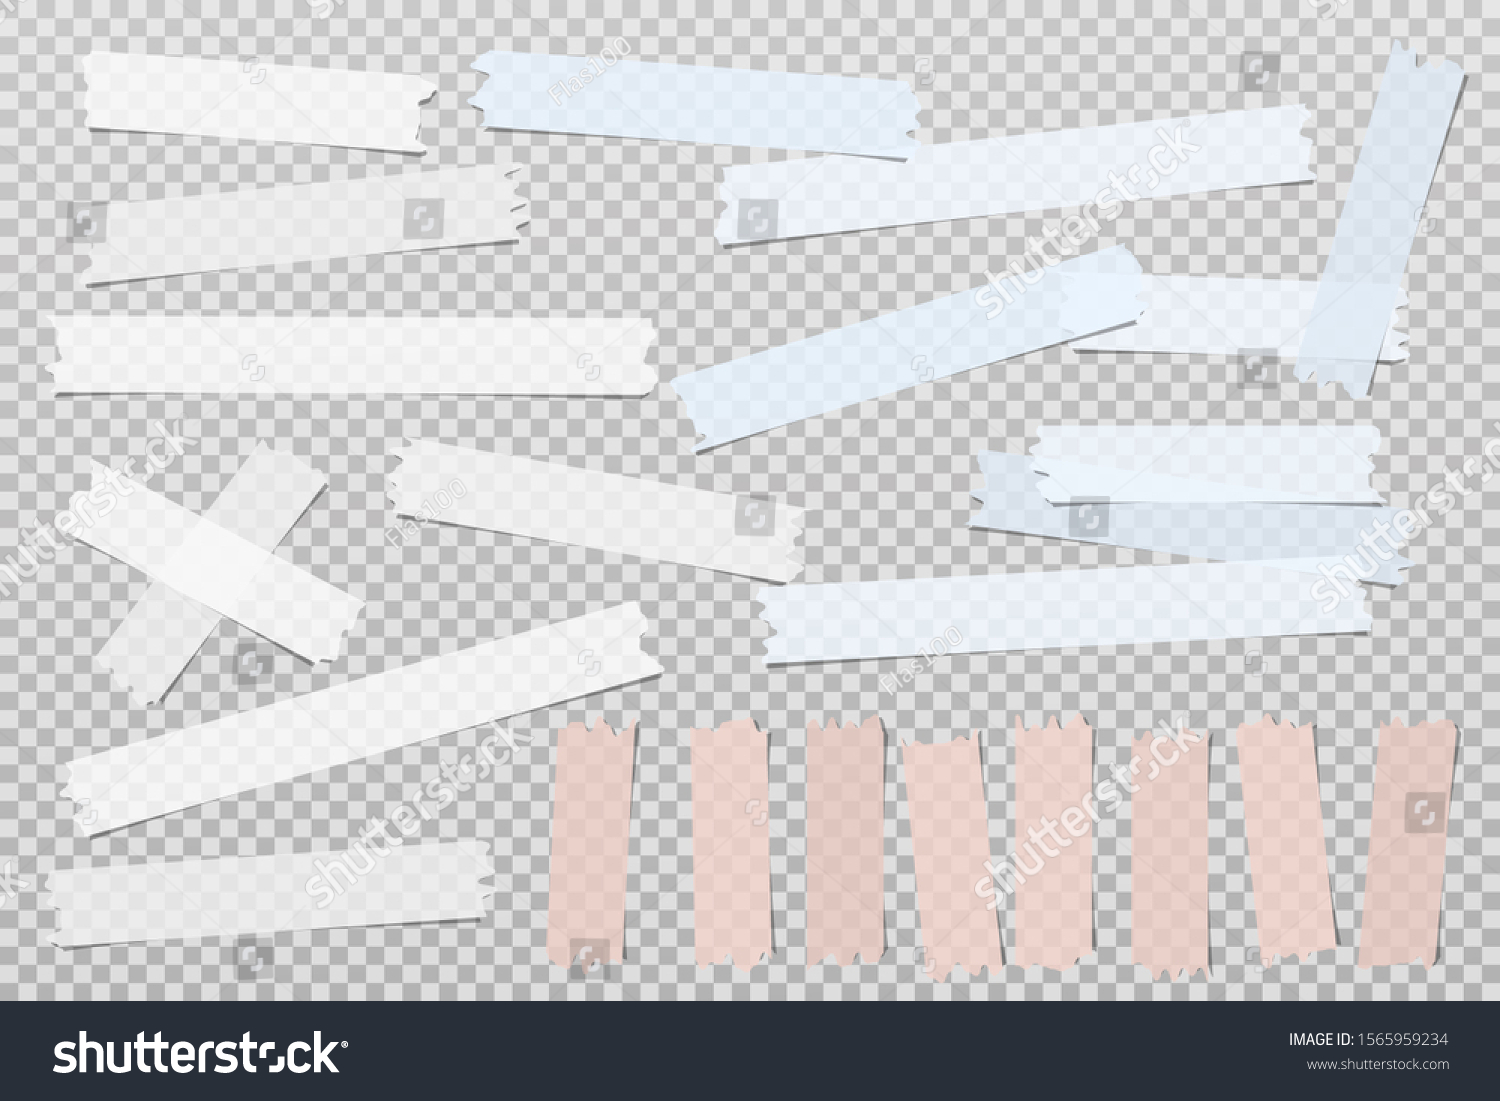 Colorful, white adhesive, sticky, masking, duct tape strips for text are on squared gray background. Vector illustration #1565959234